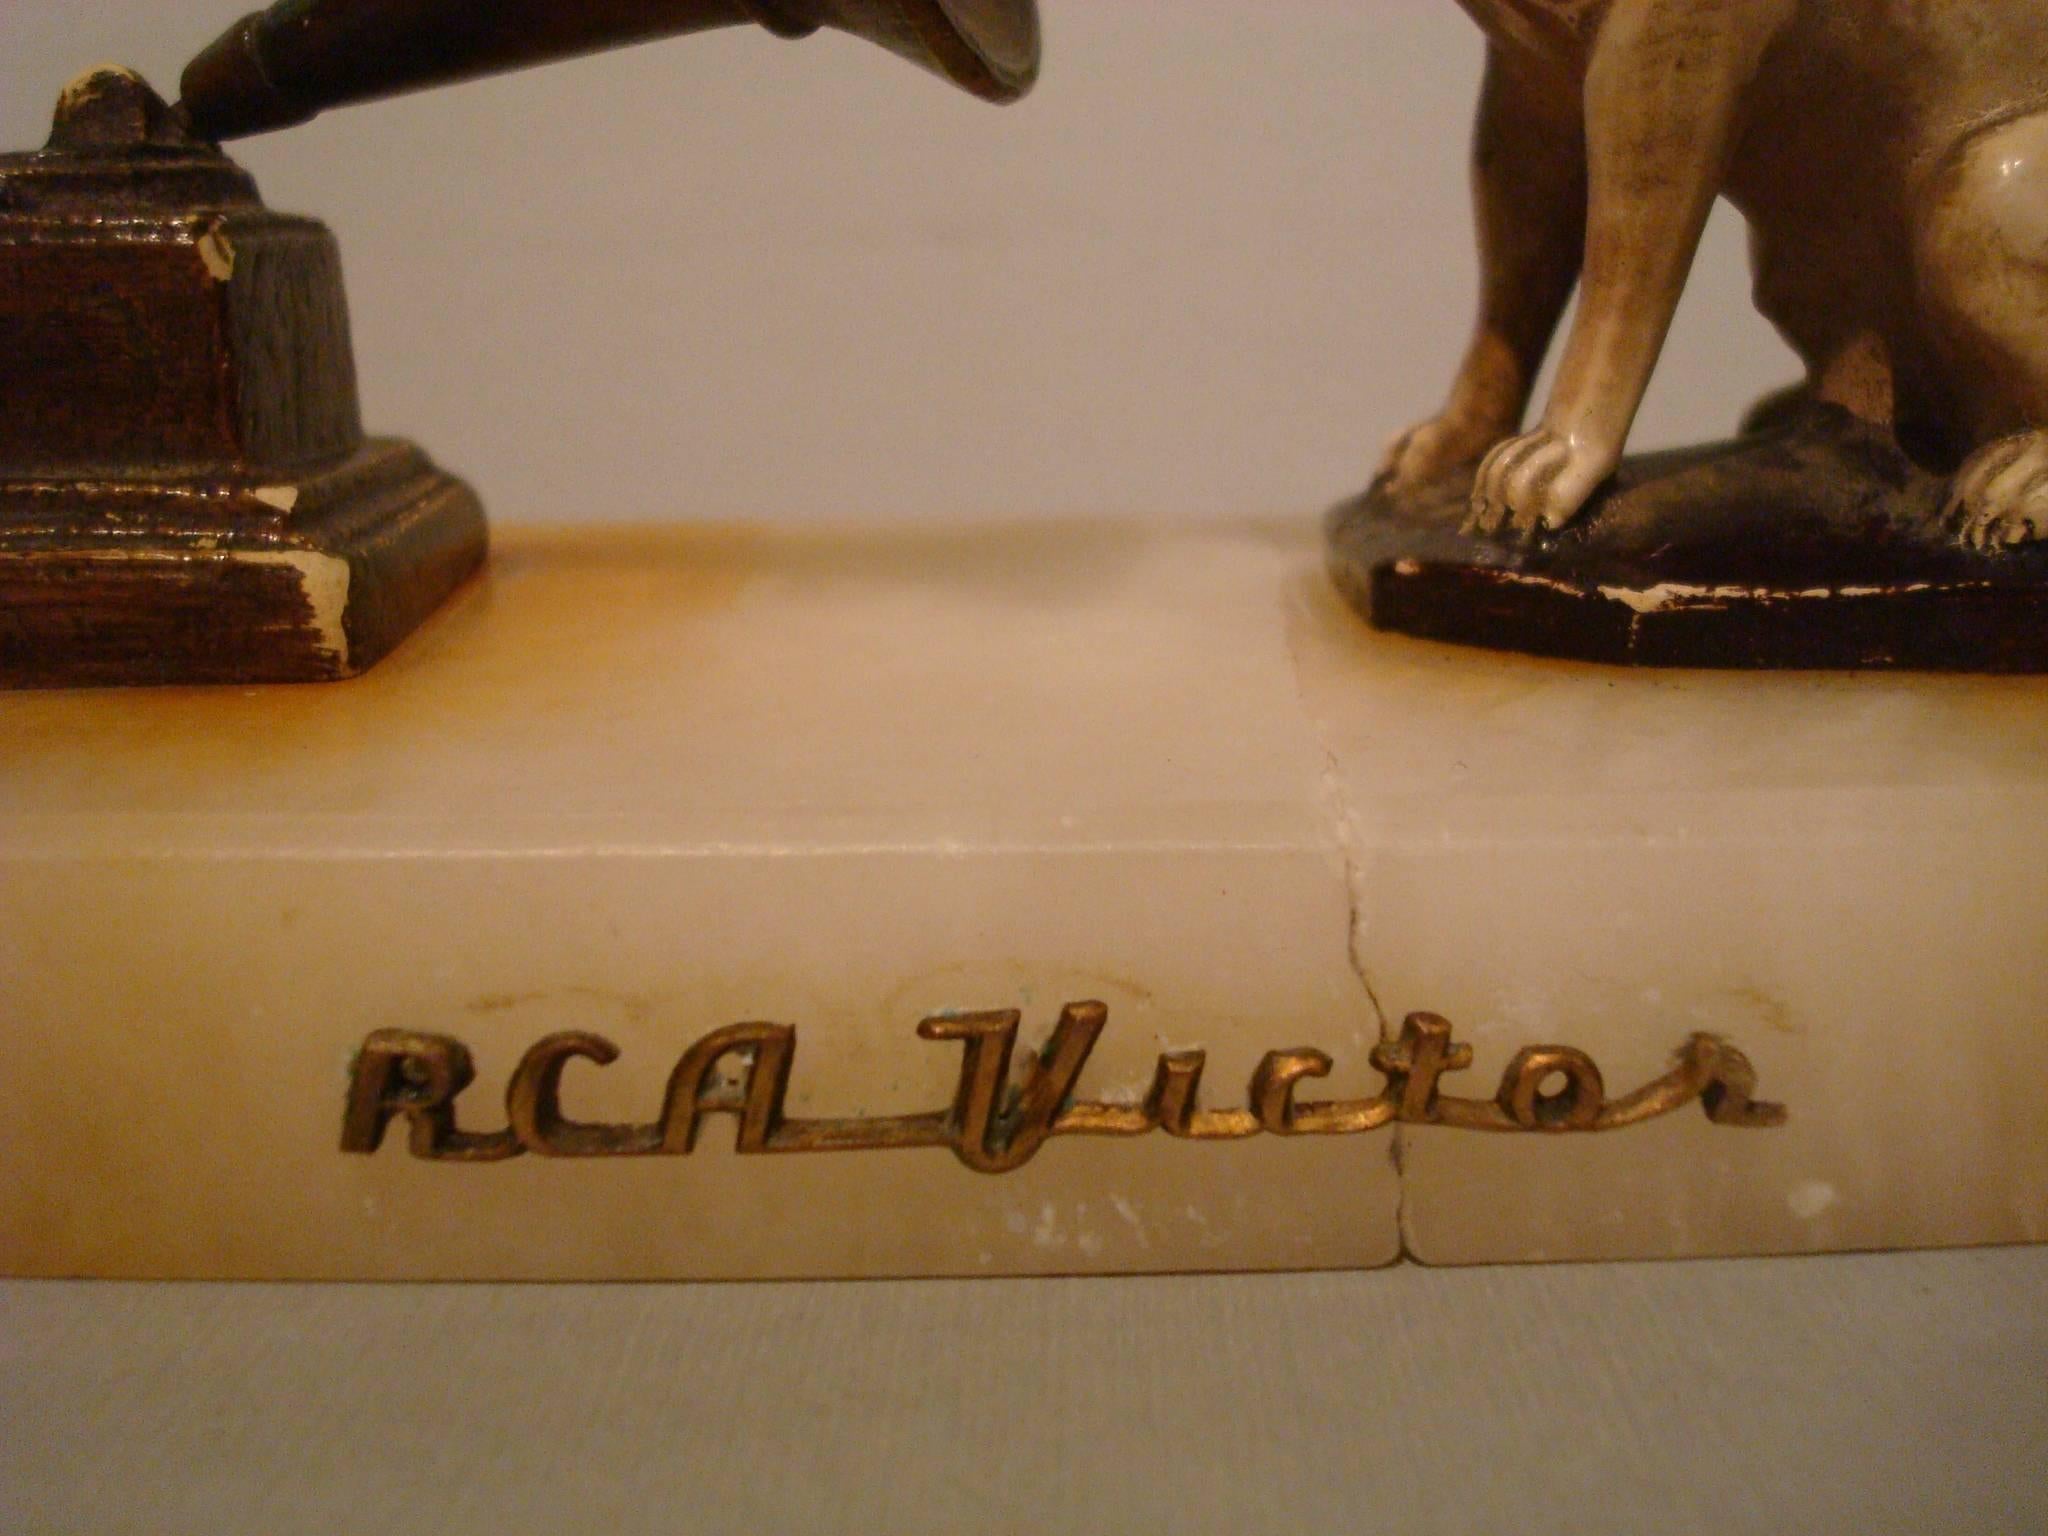 Radio Corporation of America R.C.A. Victor - Nipper dog sculpture desk paperweight advertising, 1910
Painted metal? Looks like plaster, but sounds metal, Advertising Paperweight of Nipper, the RCA Logo´s dog. The dog and the gramophone R.C.A.